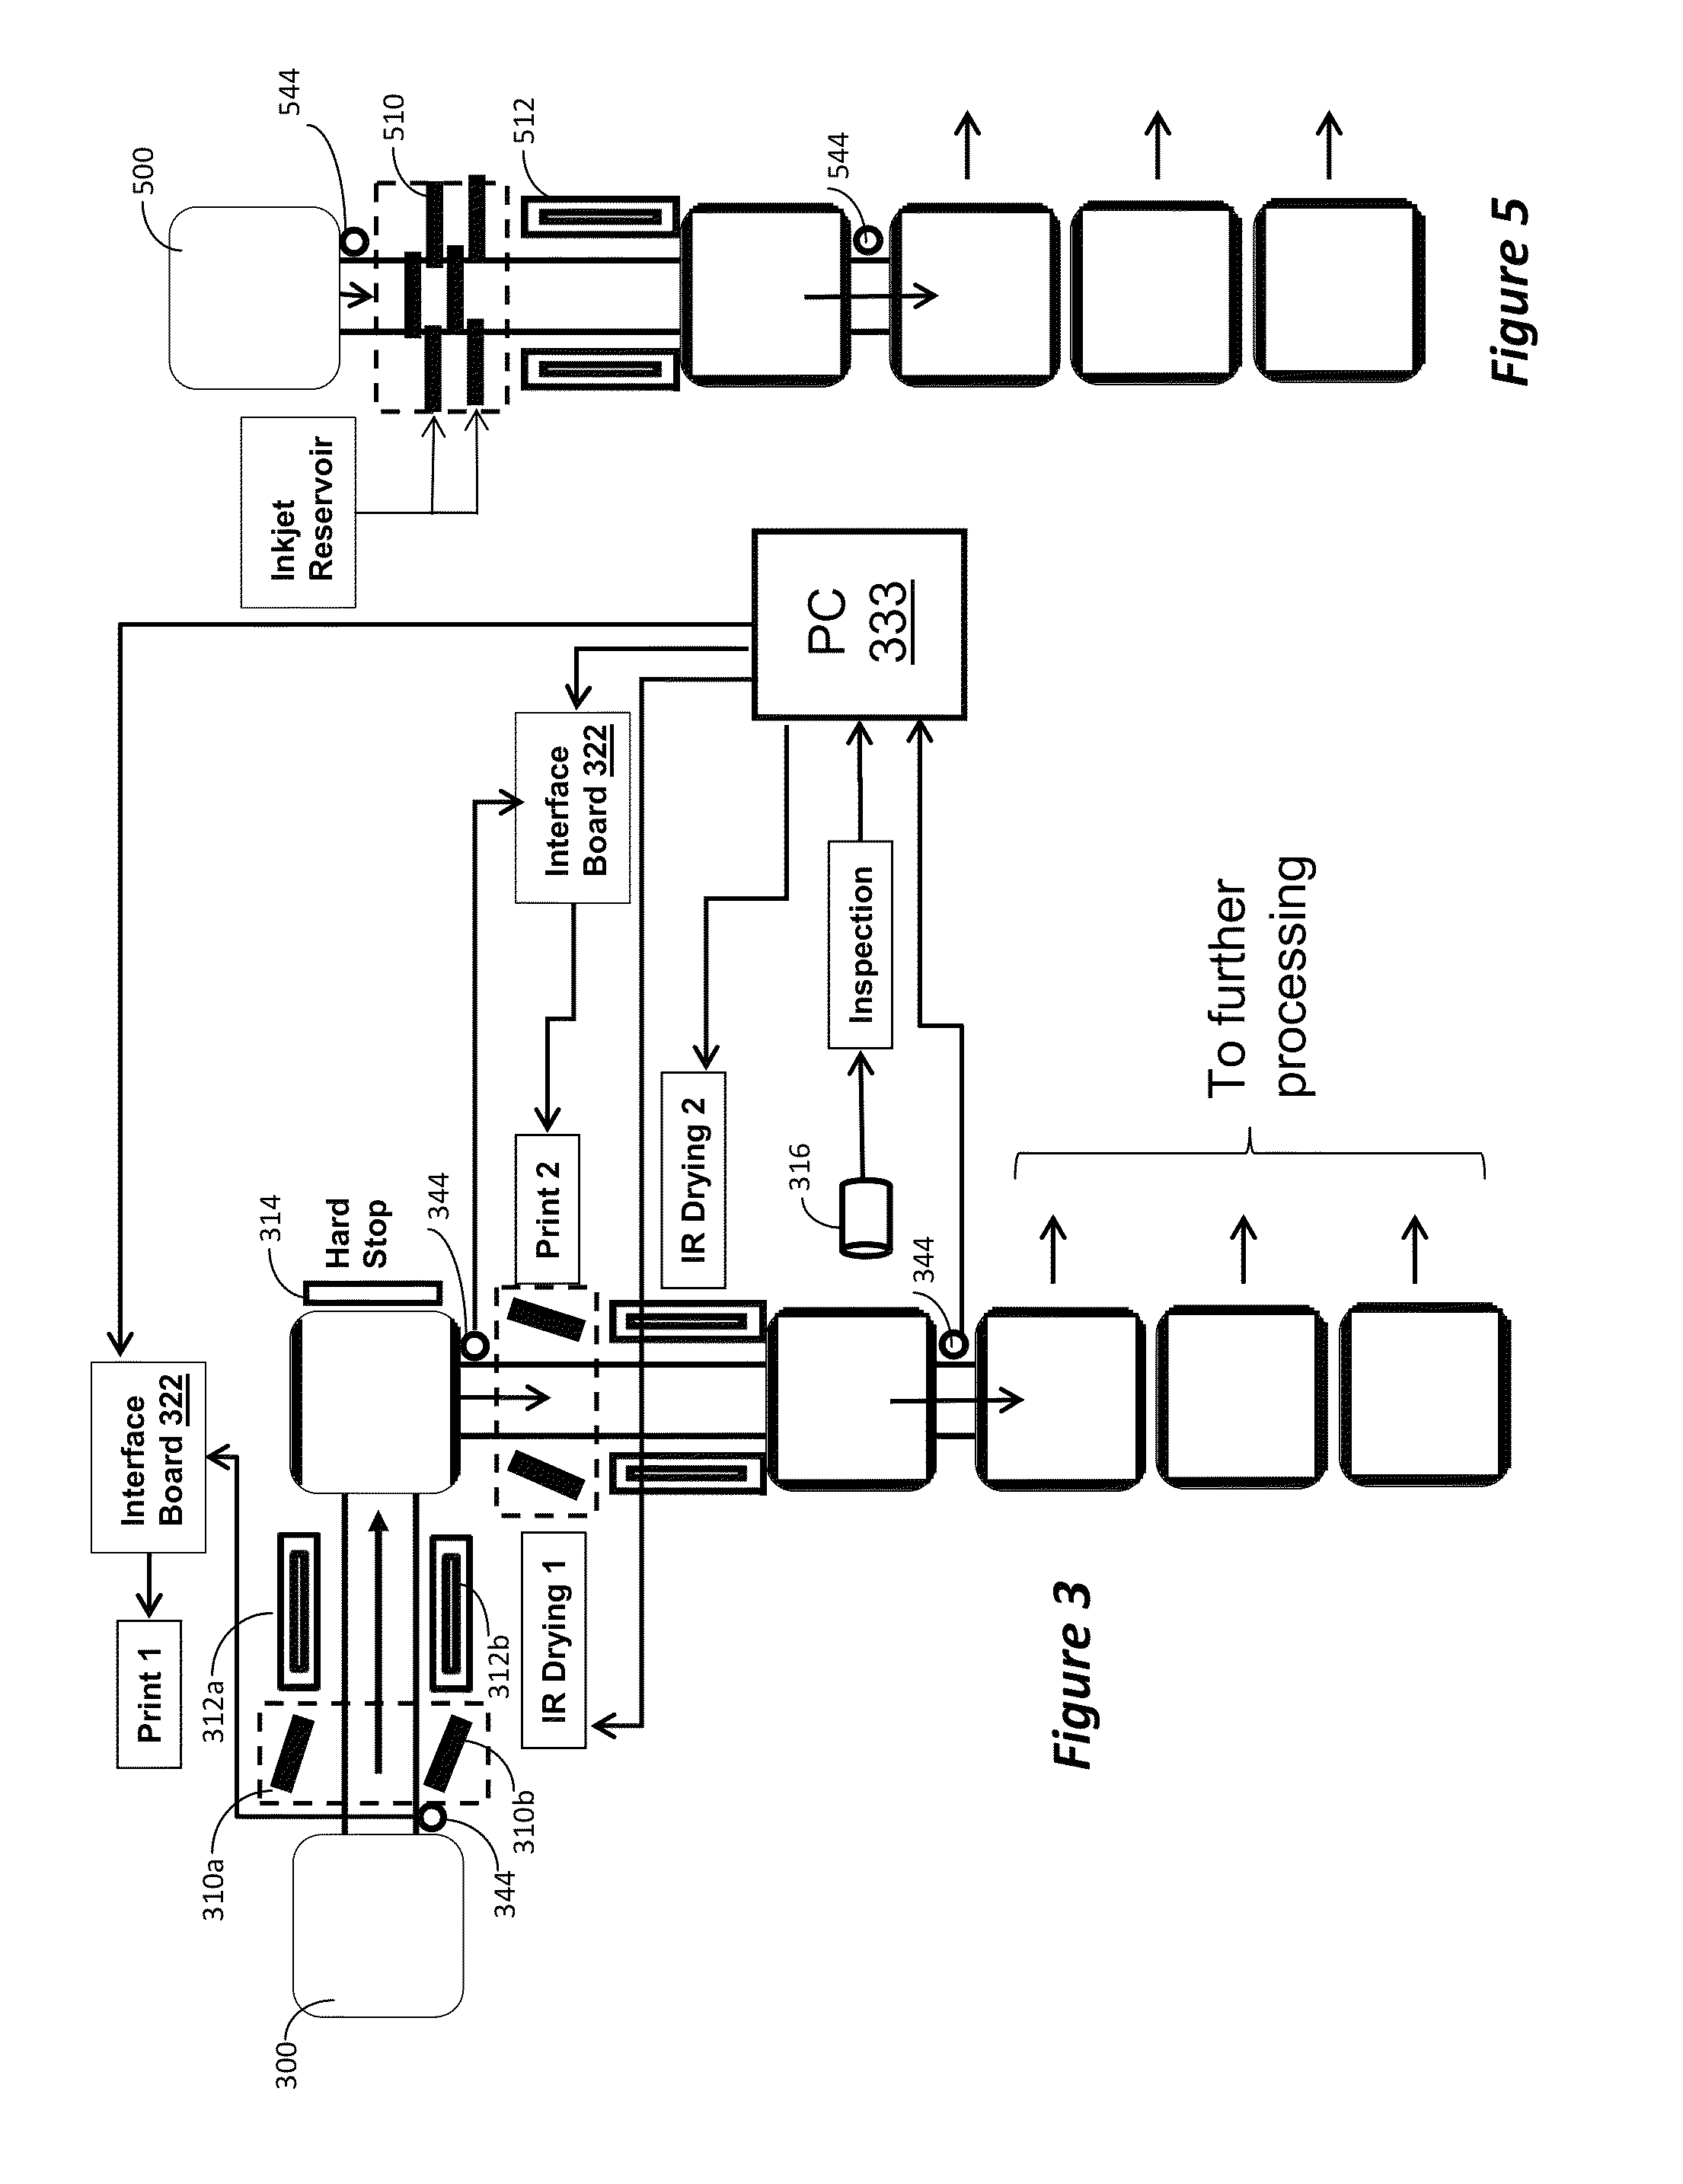 Method and apparatus for masking solar cell substrates for deposition